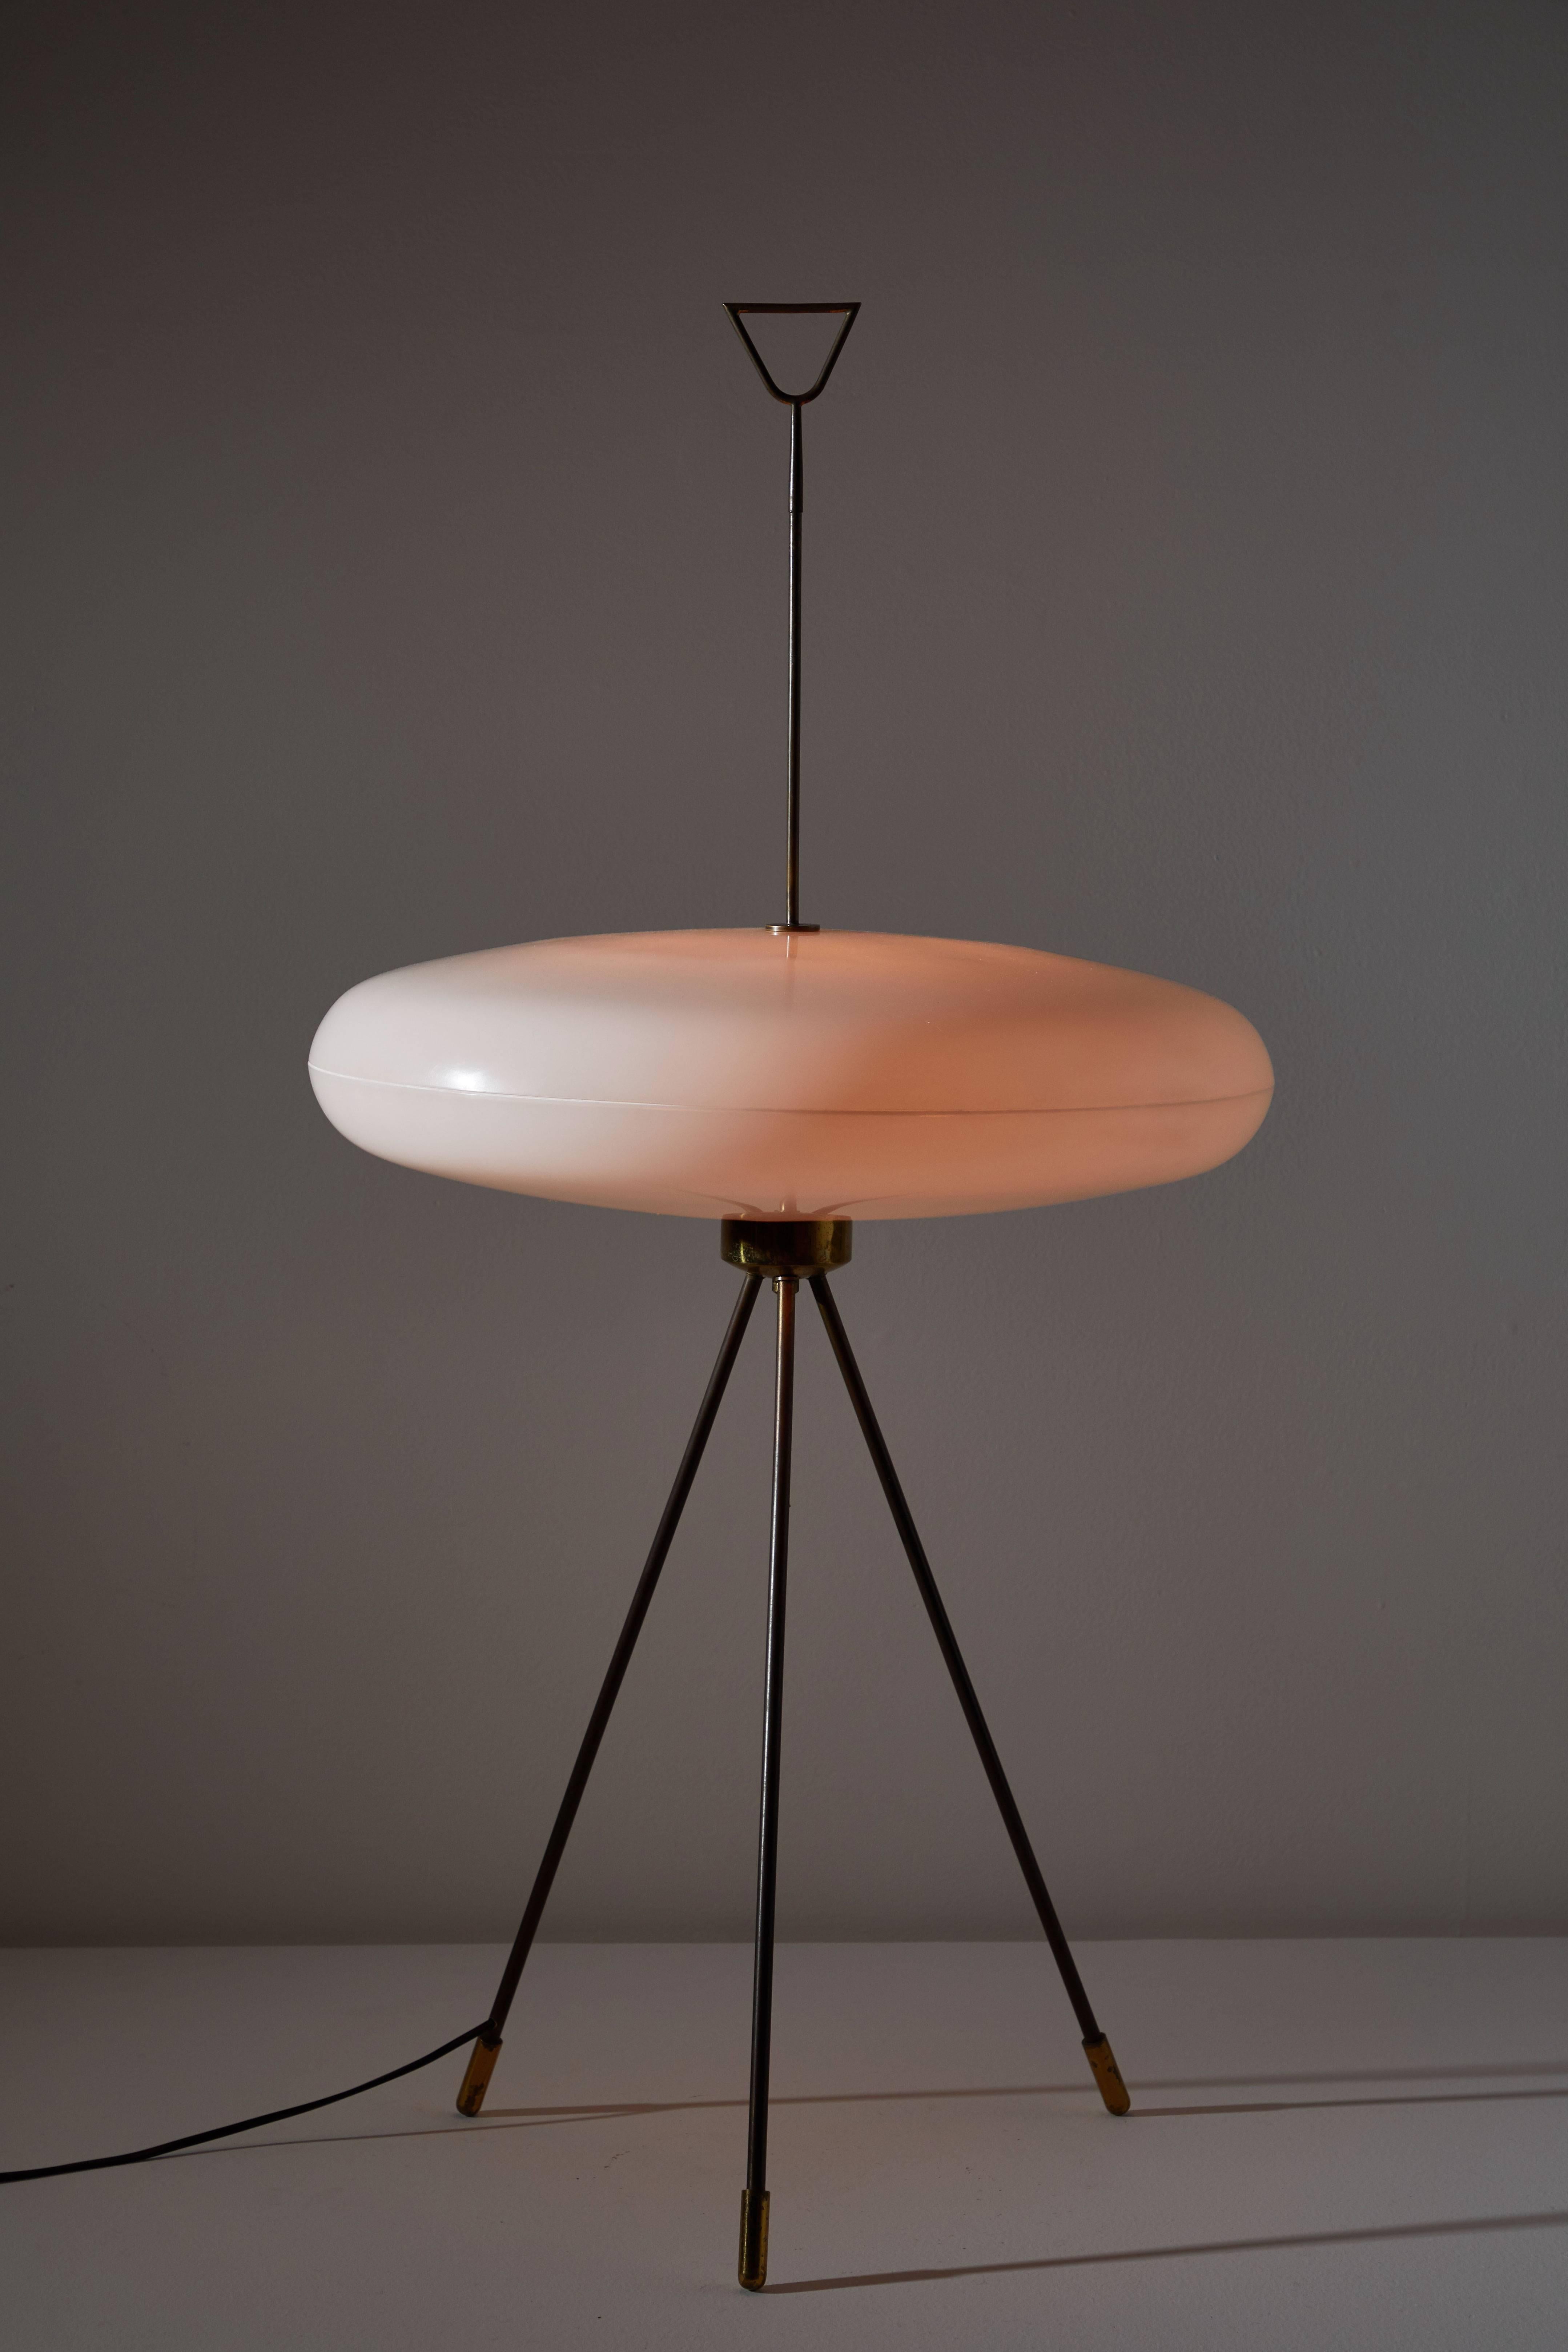 Floor lamp in the style of Gio Ponti. Designed and manufactured in Italy, circa 1950s. Resilient, substantial acrylic diffuser and brass. Original cord. Takes three E27 25w maximum bulbs.